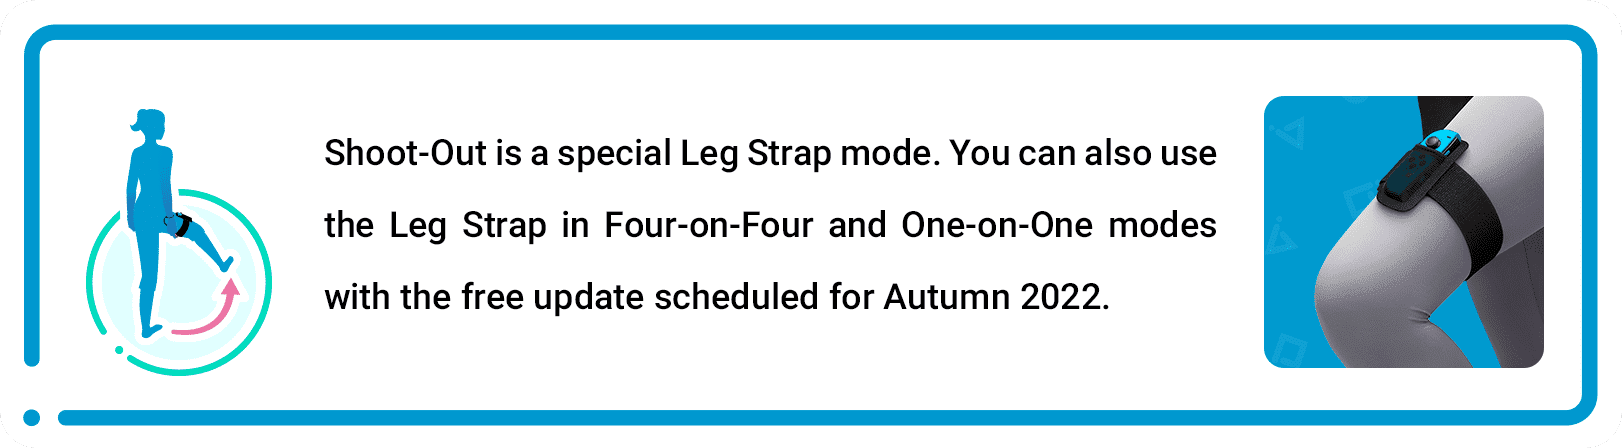 Shoot-Out is a special Leg Strap mode. You can also use the Leg Strap in Four-on-Four and One-on-One modes with the free update scheduled for Autumn 2022.